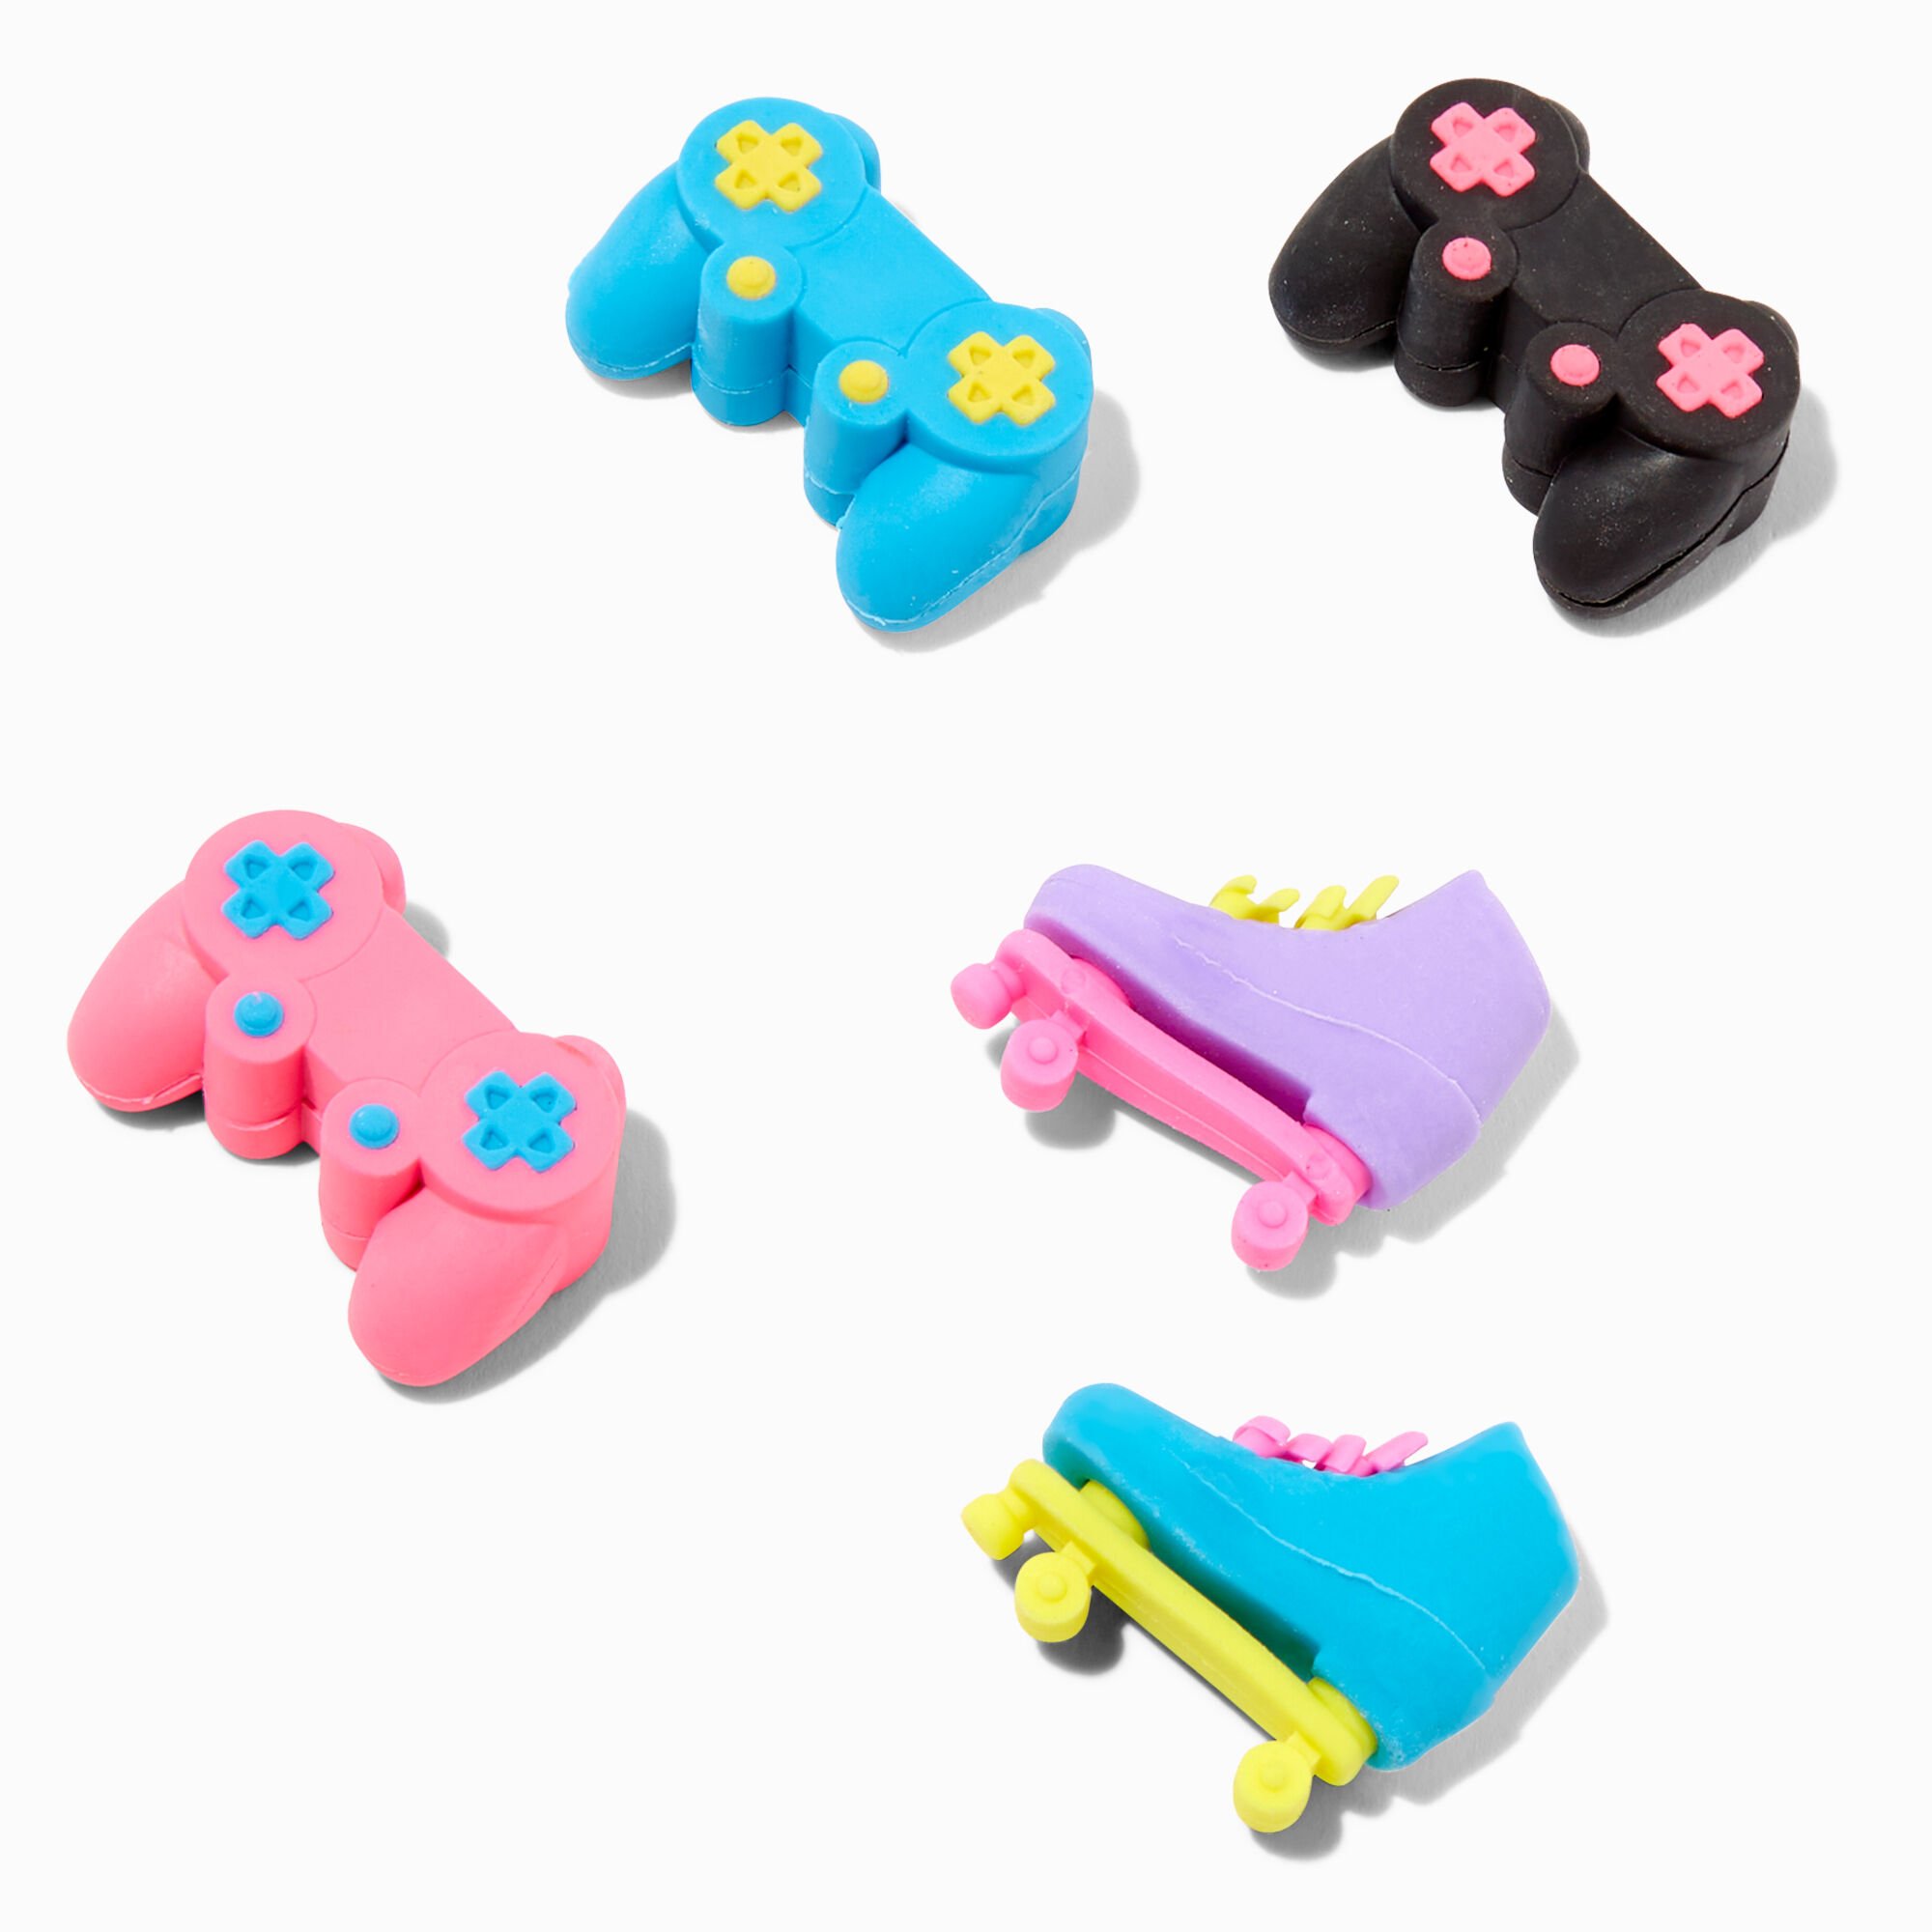 View Claires Game Controller Roller Skate Erasers 5 Pack information